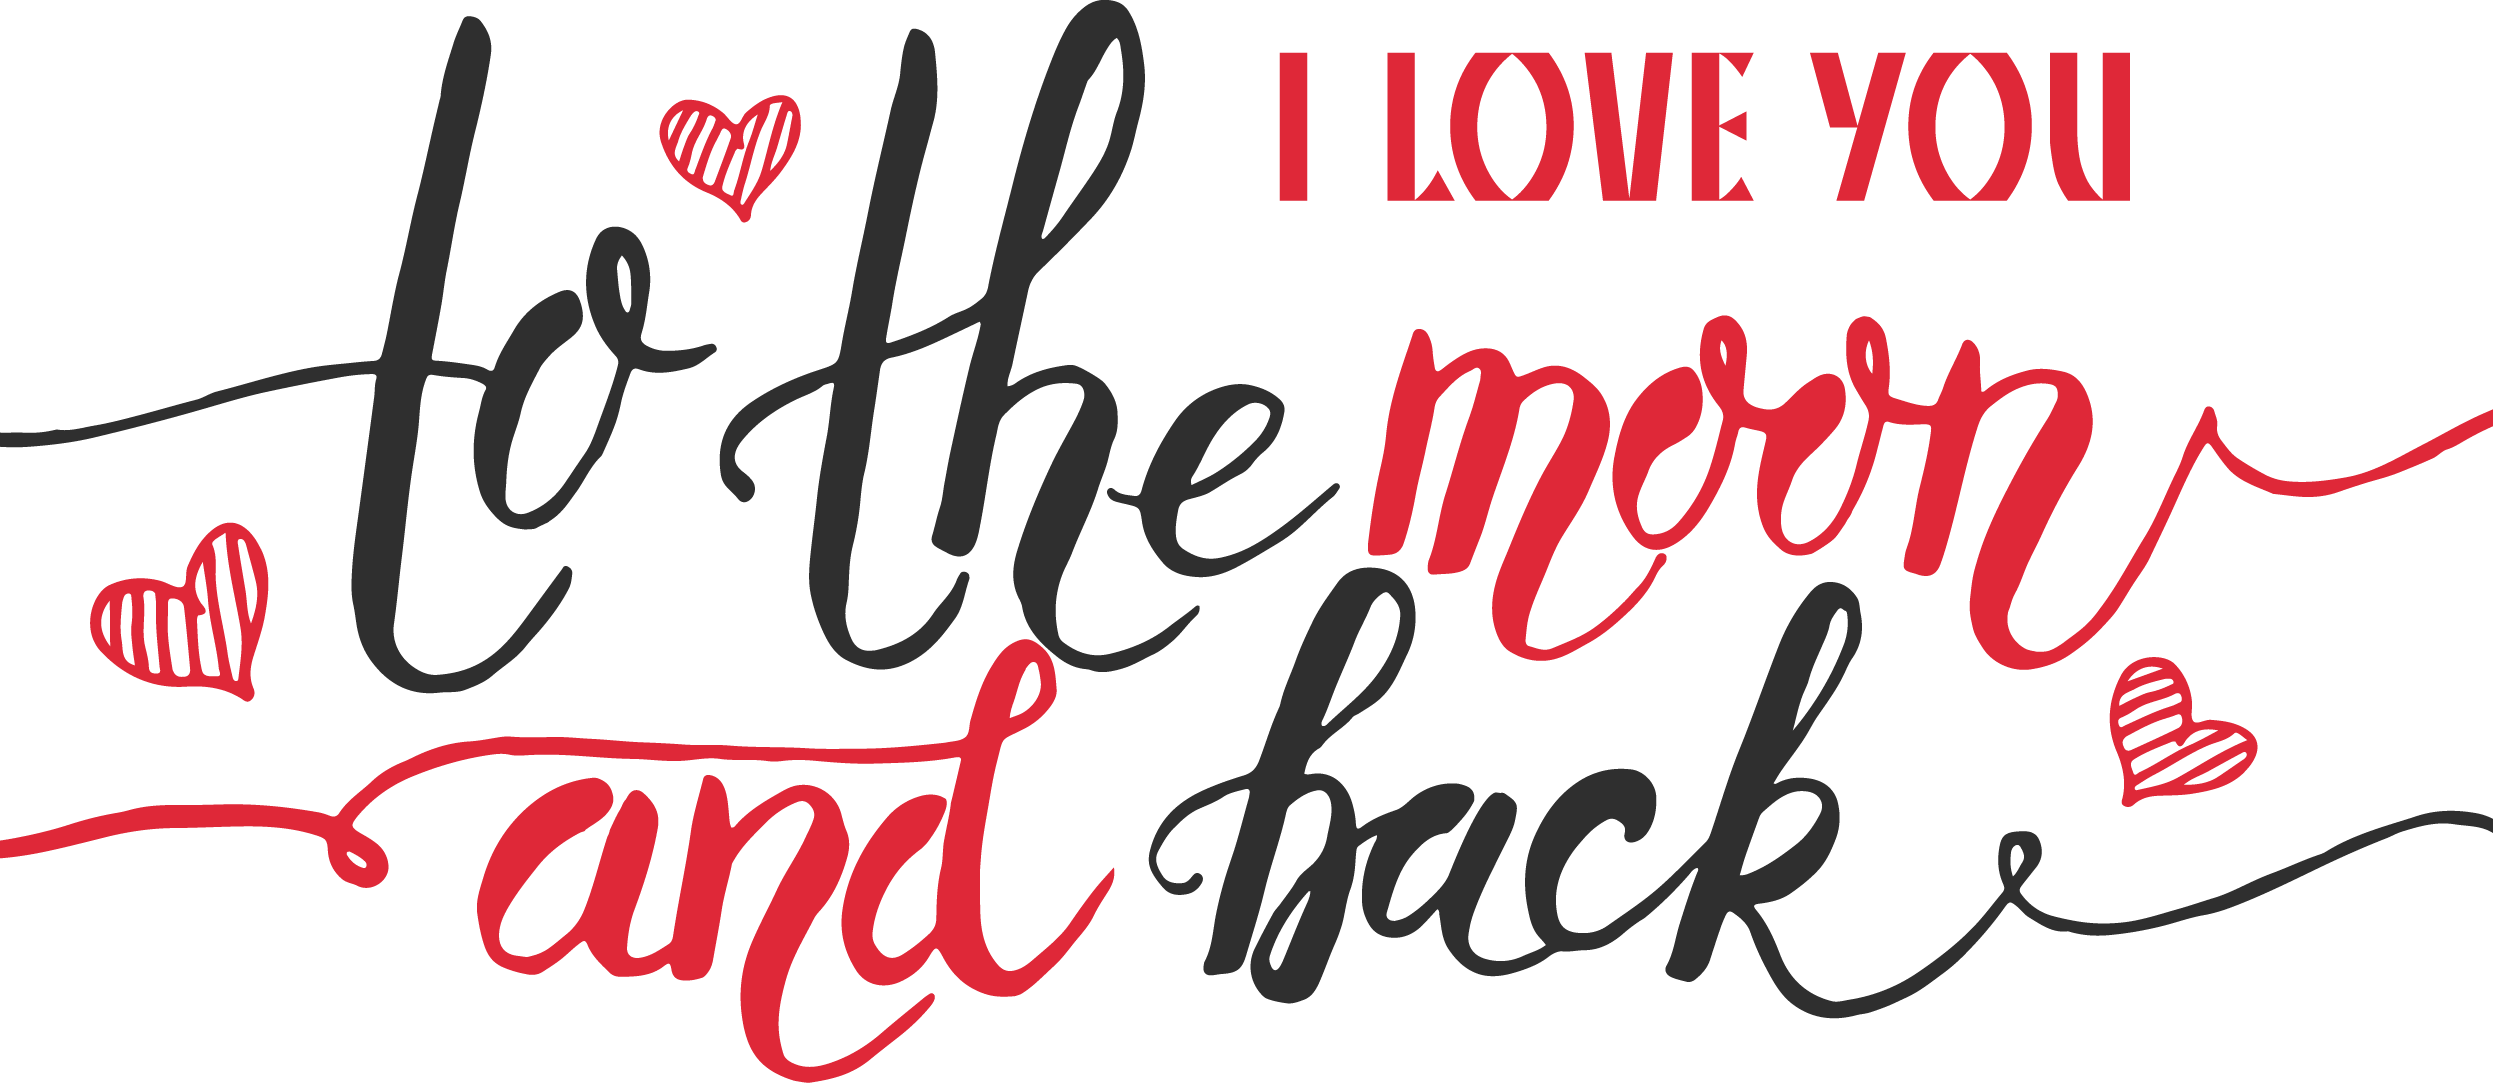 Love You To The Moon And Back_ Cursive Text